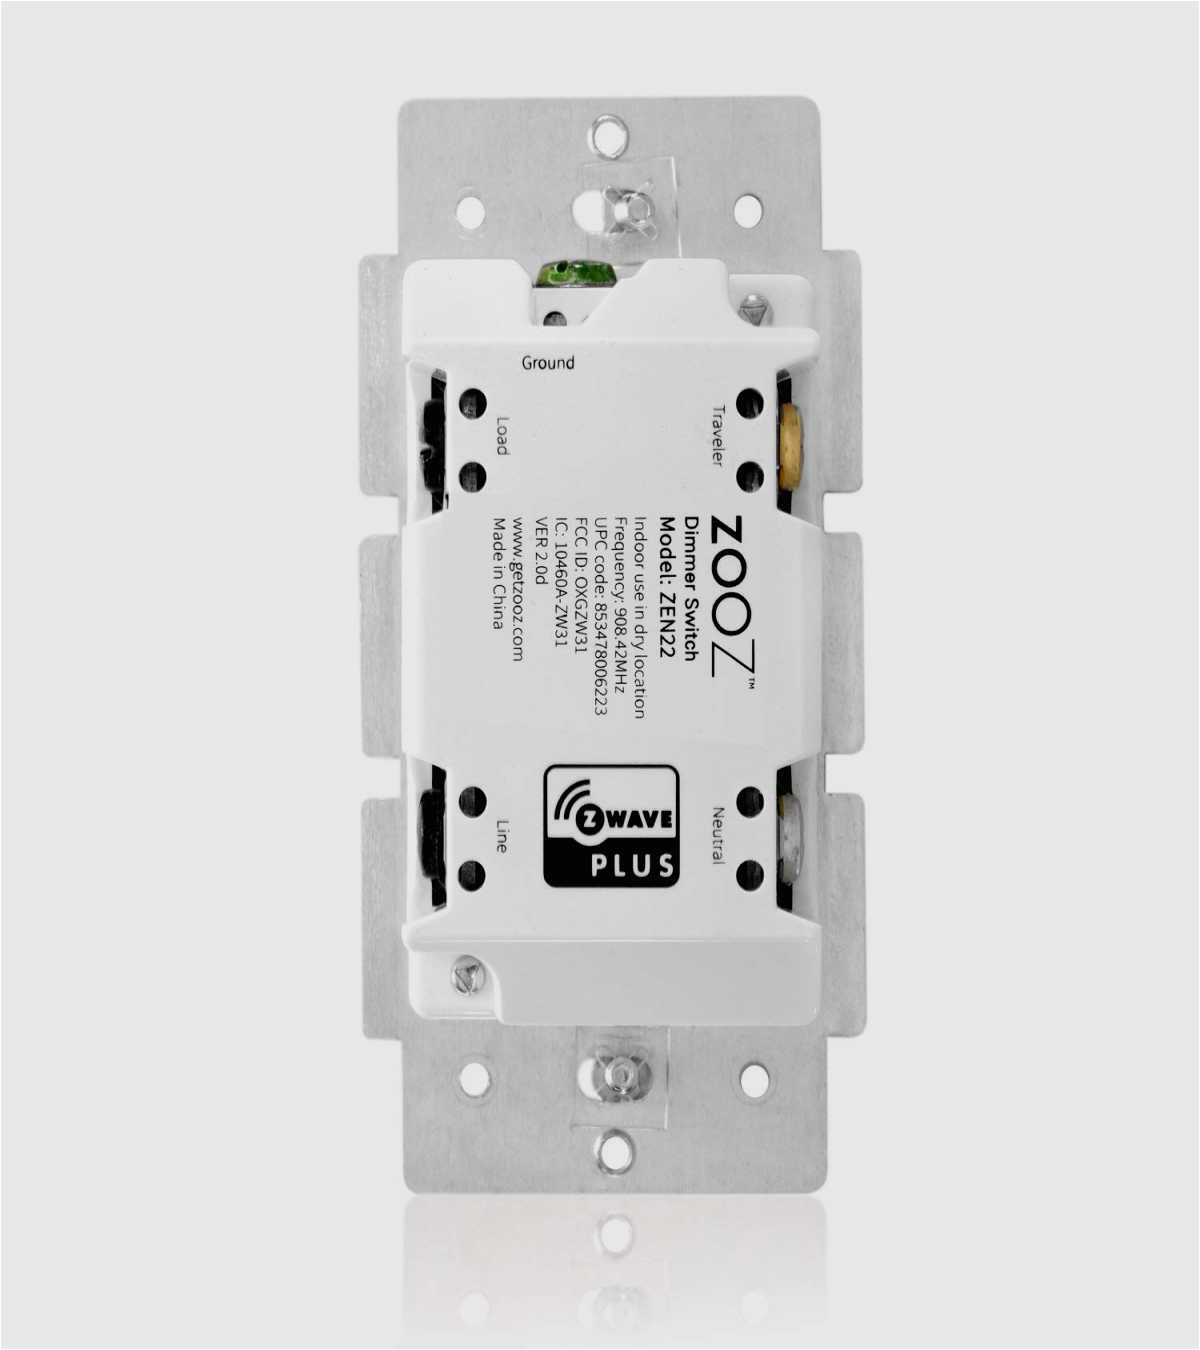 3 way dimmer switch zooz z wave plus wall dimmer switch zen22 white ver 2 0 works of 3 way dimmer switch jpg